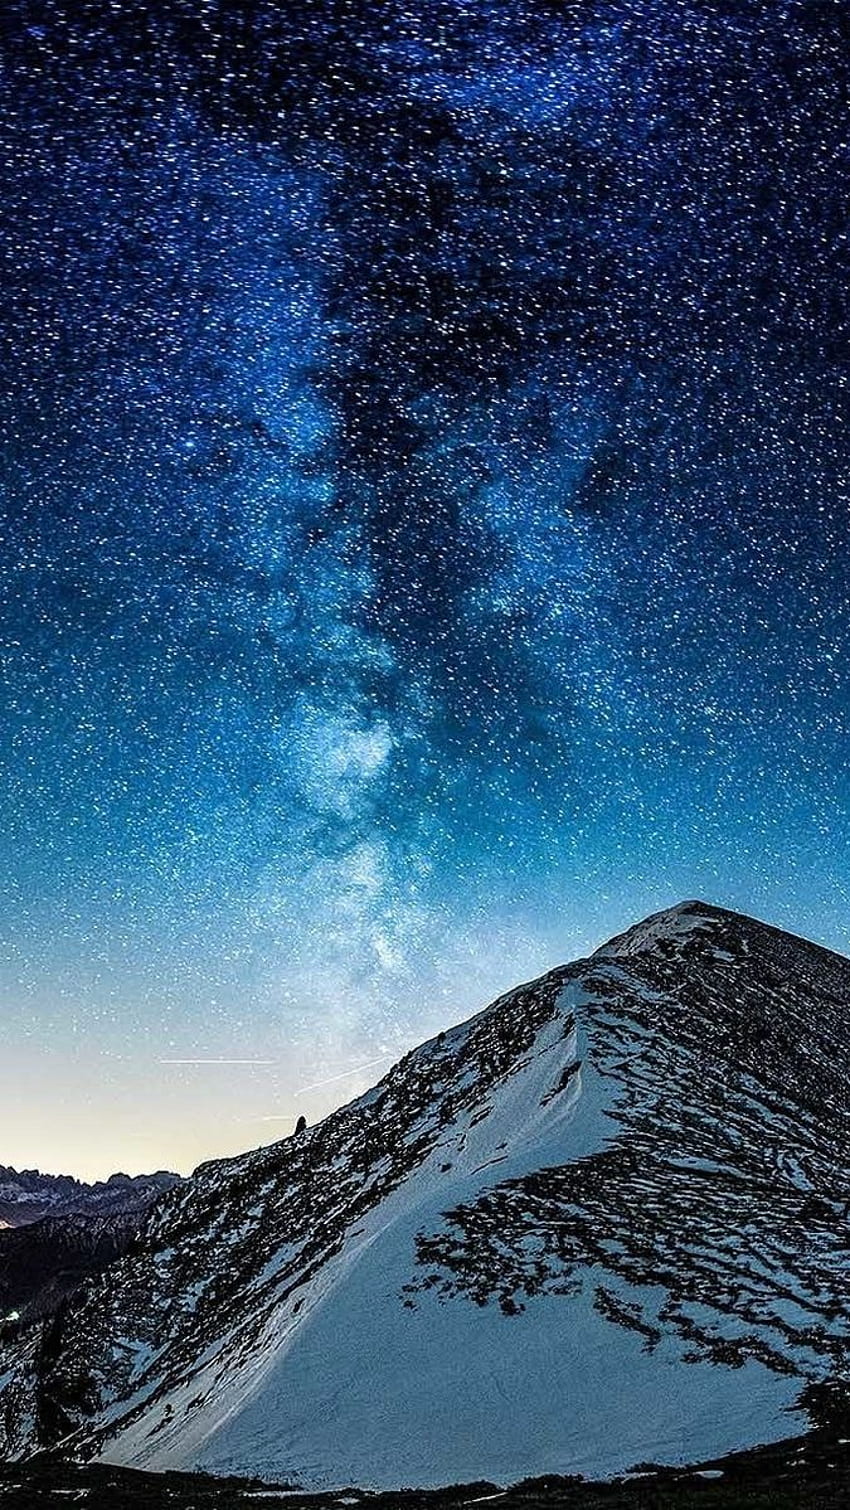 Milky Way Galaxy View From Mountain IPhone IPhone : IPhone , Milky Way ...